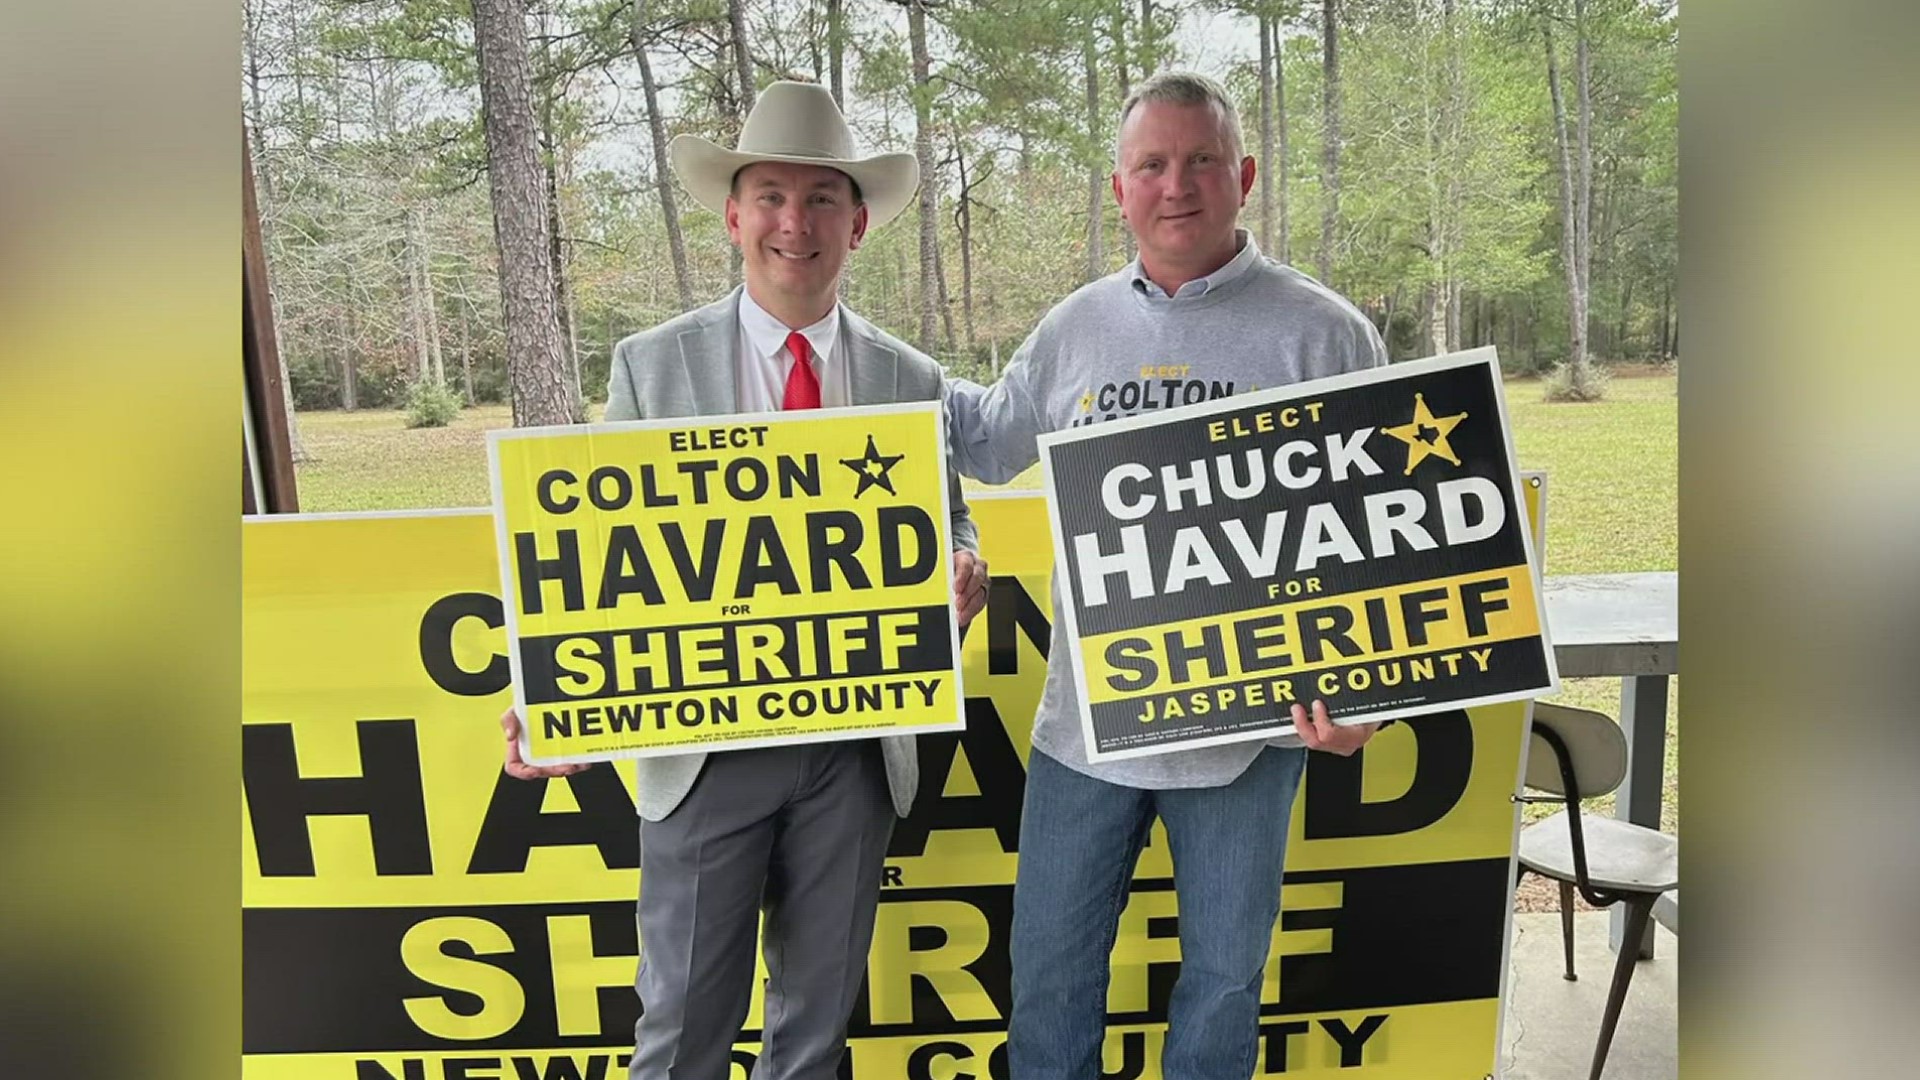 Chuck Havard was elected as Jasper County Sheriff and his son, Colton Havard was elected as Newton County Sheriff at the same time.